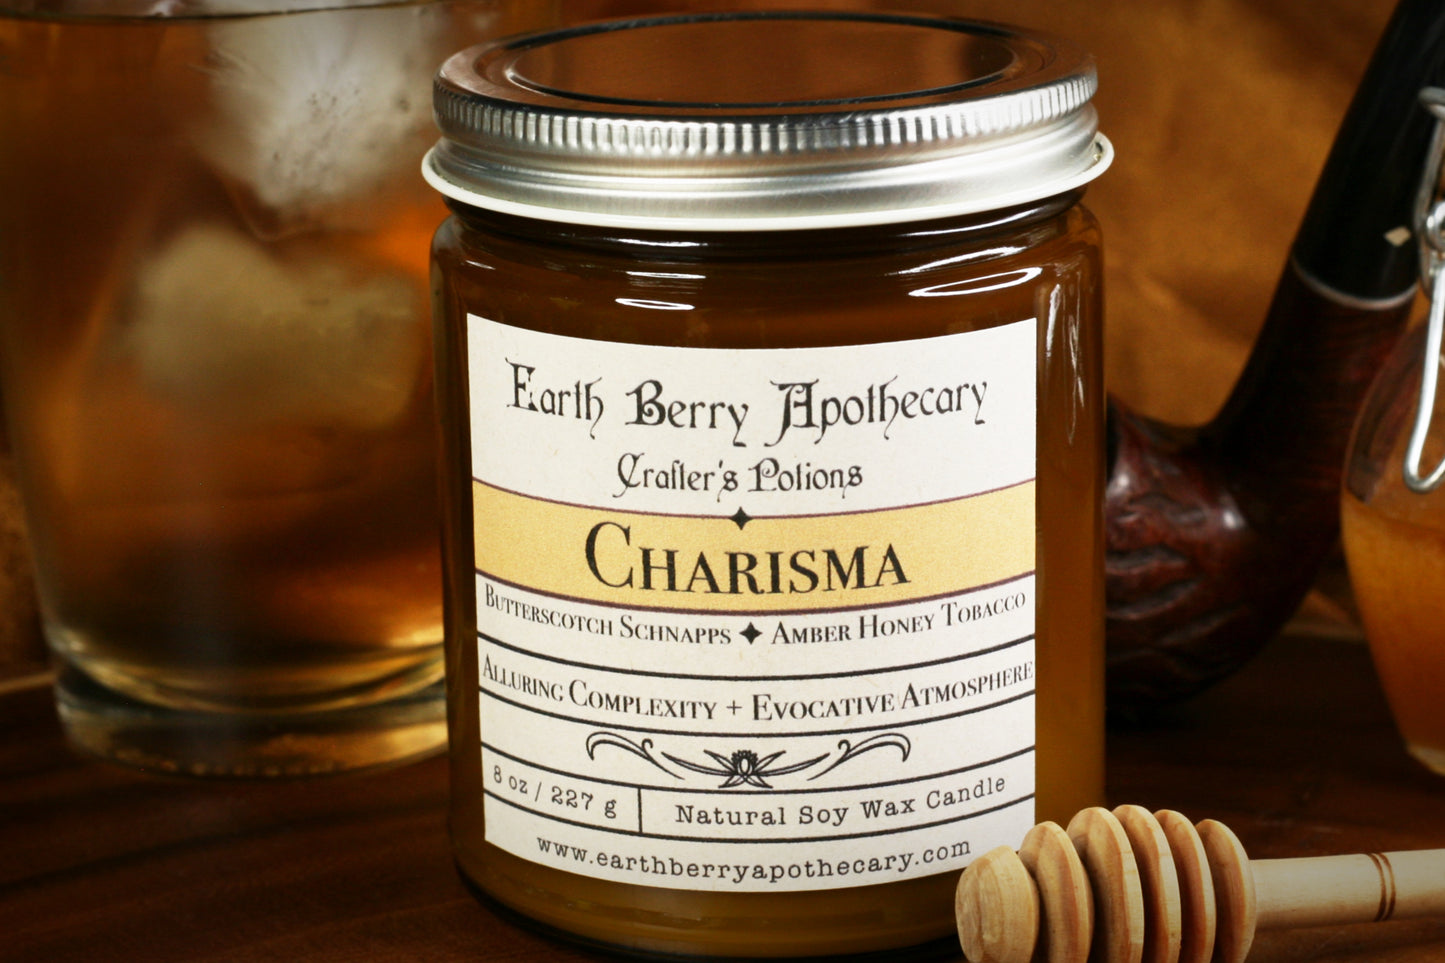 Charisma potion. Nontoxic soy candle with Butterscotch bourbon schnapps and amber honey tobacco